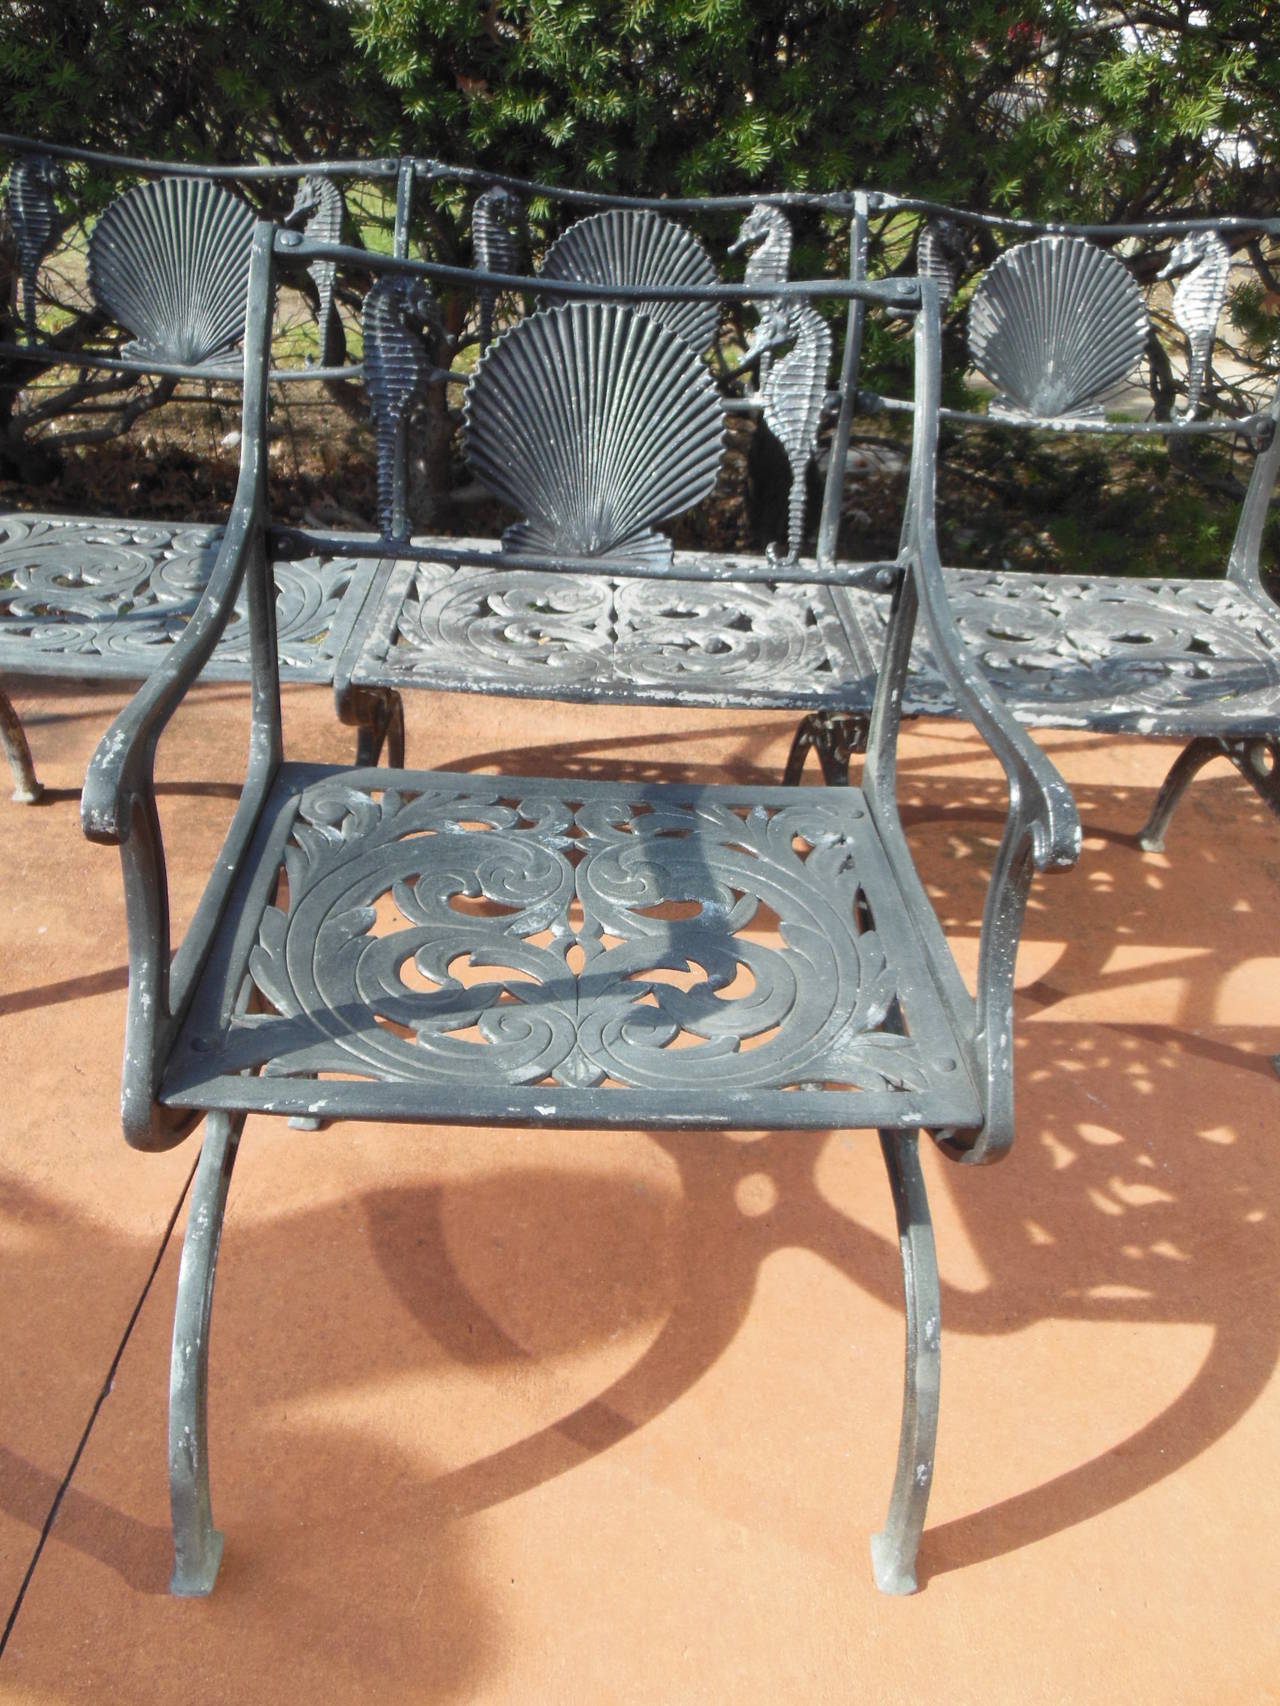 20th Century Patio Set by Molla for the Garden or Sea Shore with Shells and Sea Horse